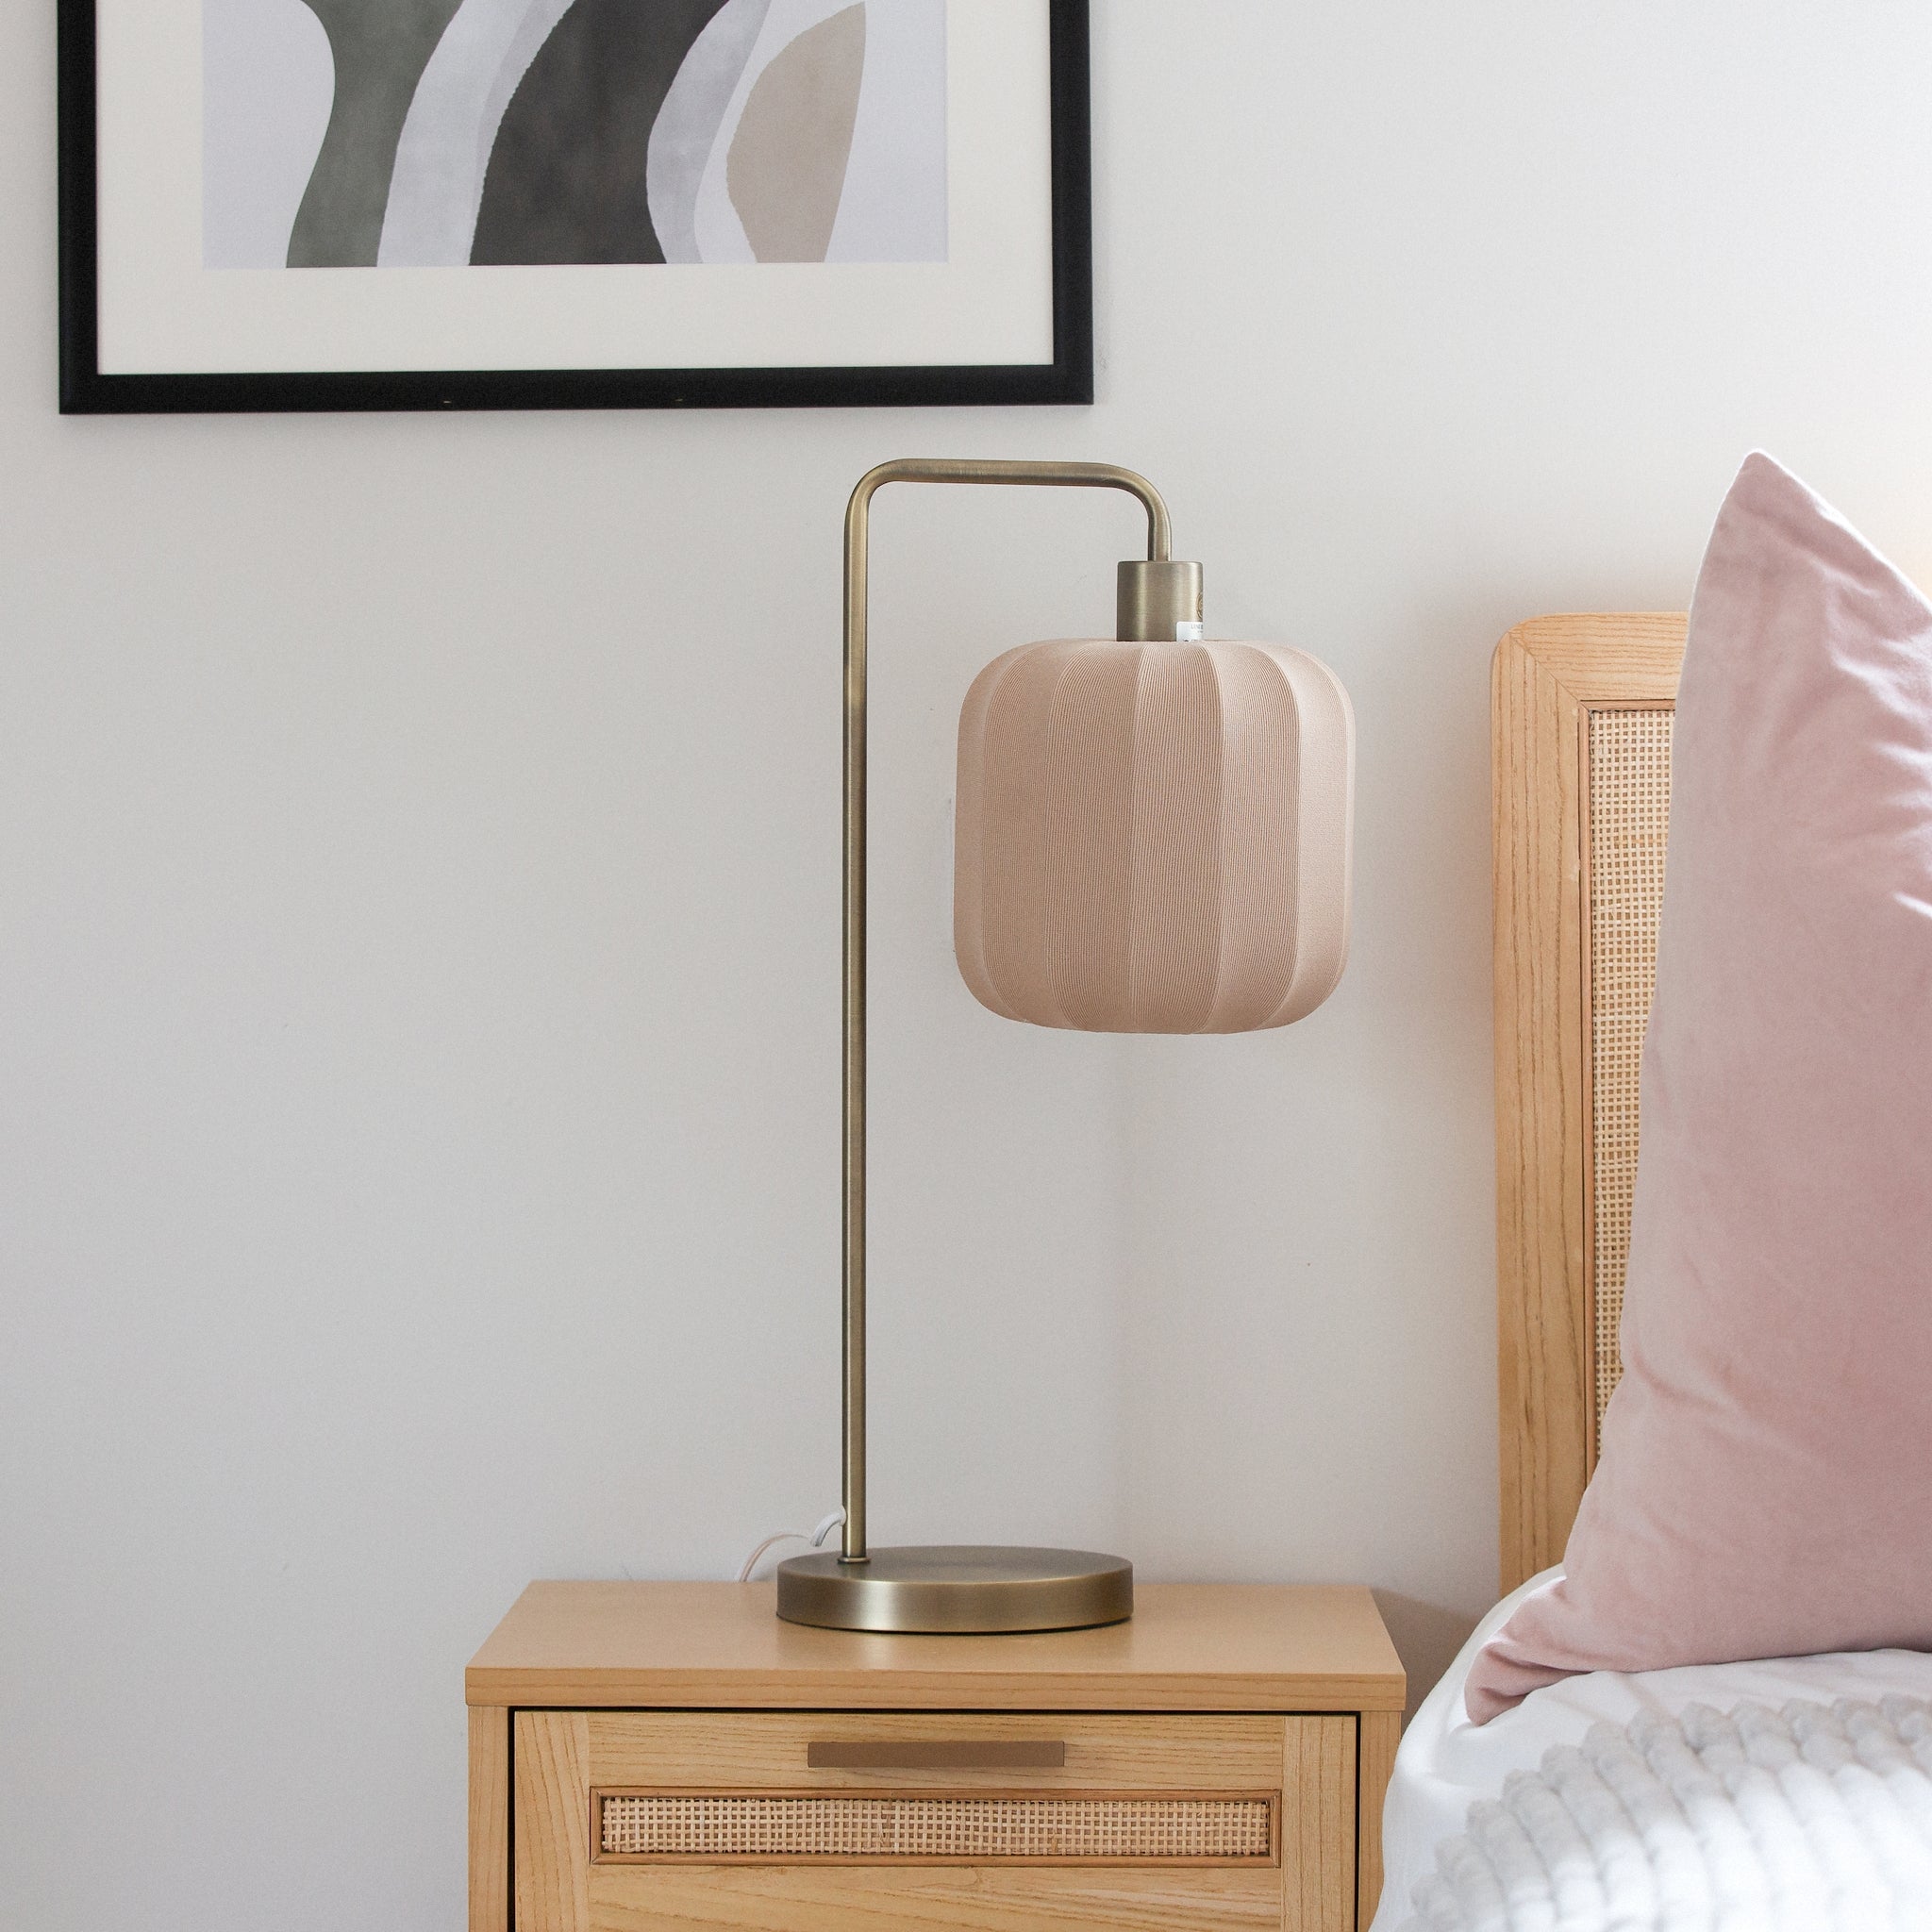 Subtle Sophistication: Introducing Pink into Your Home Decor